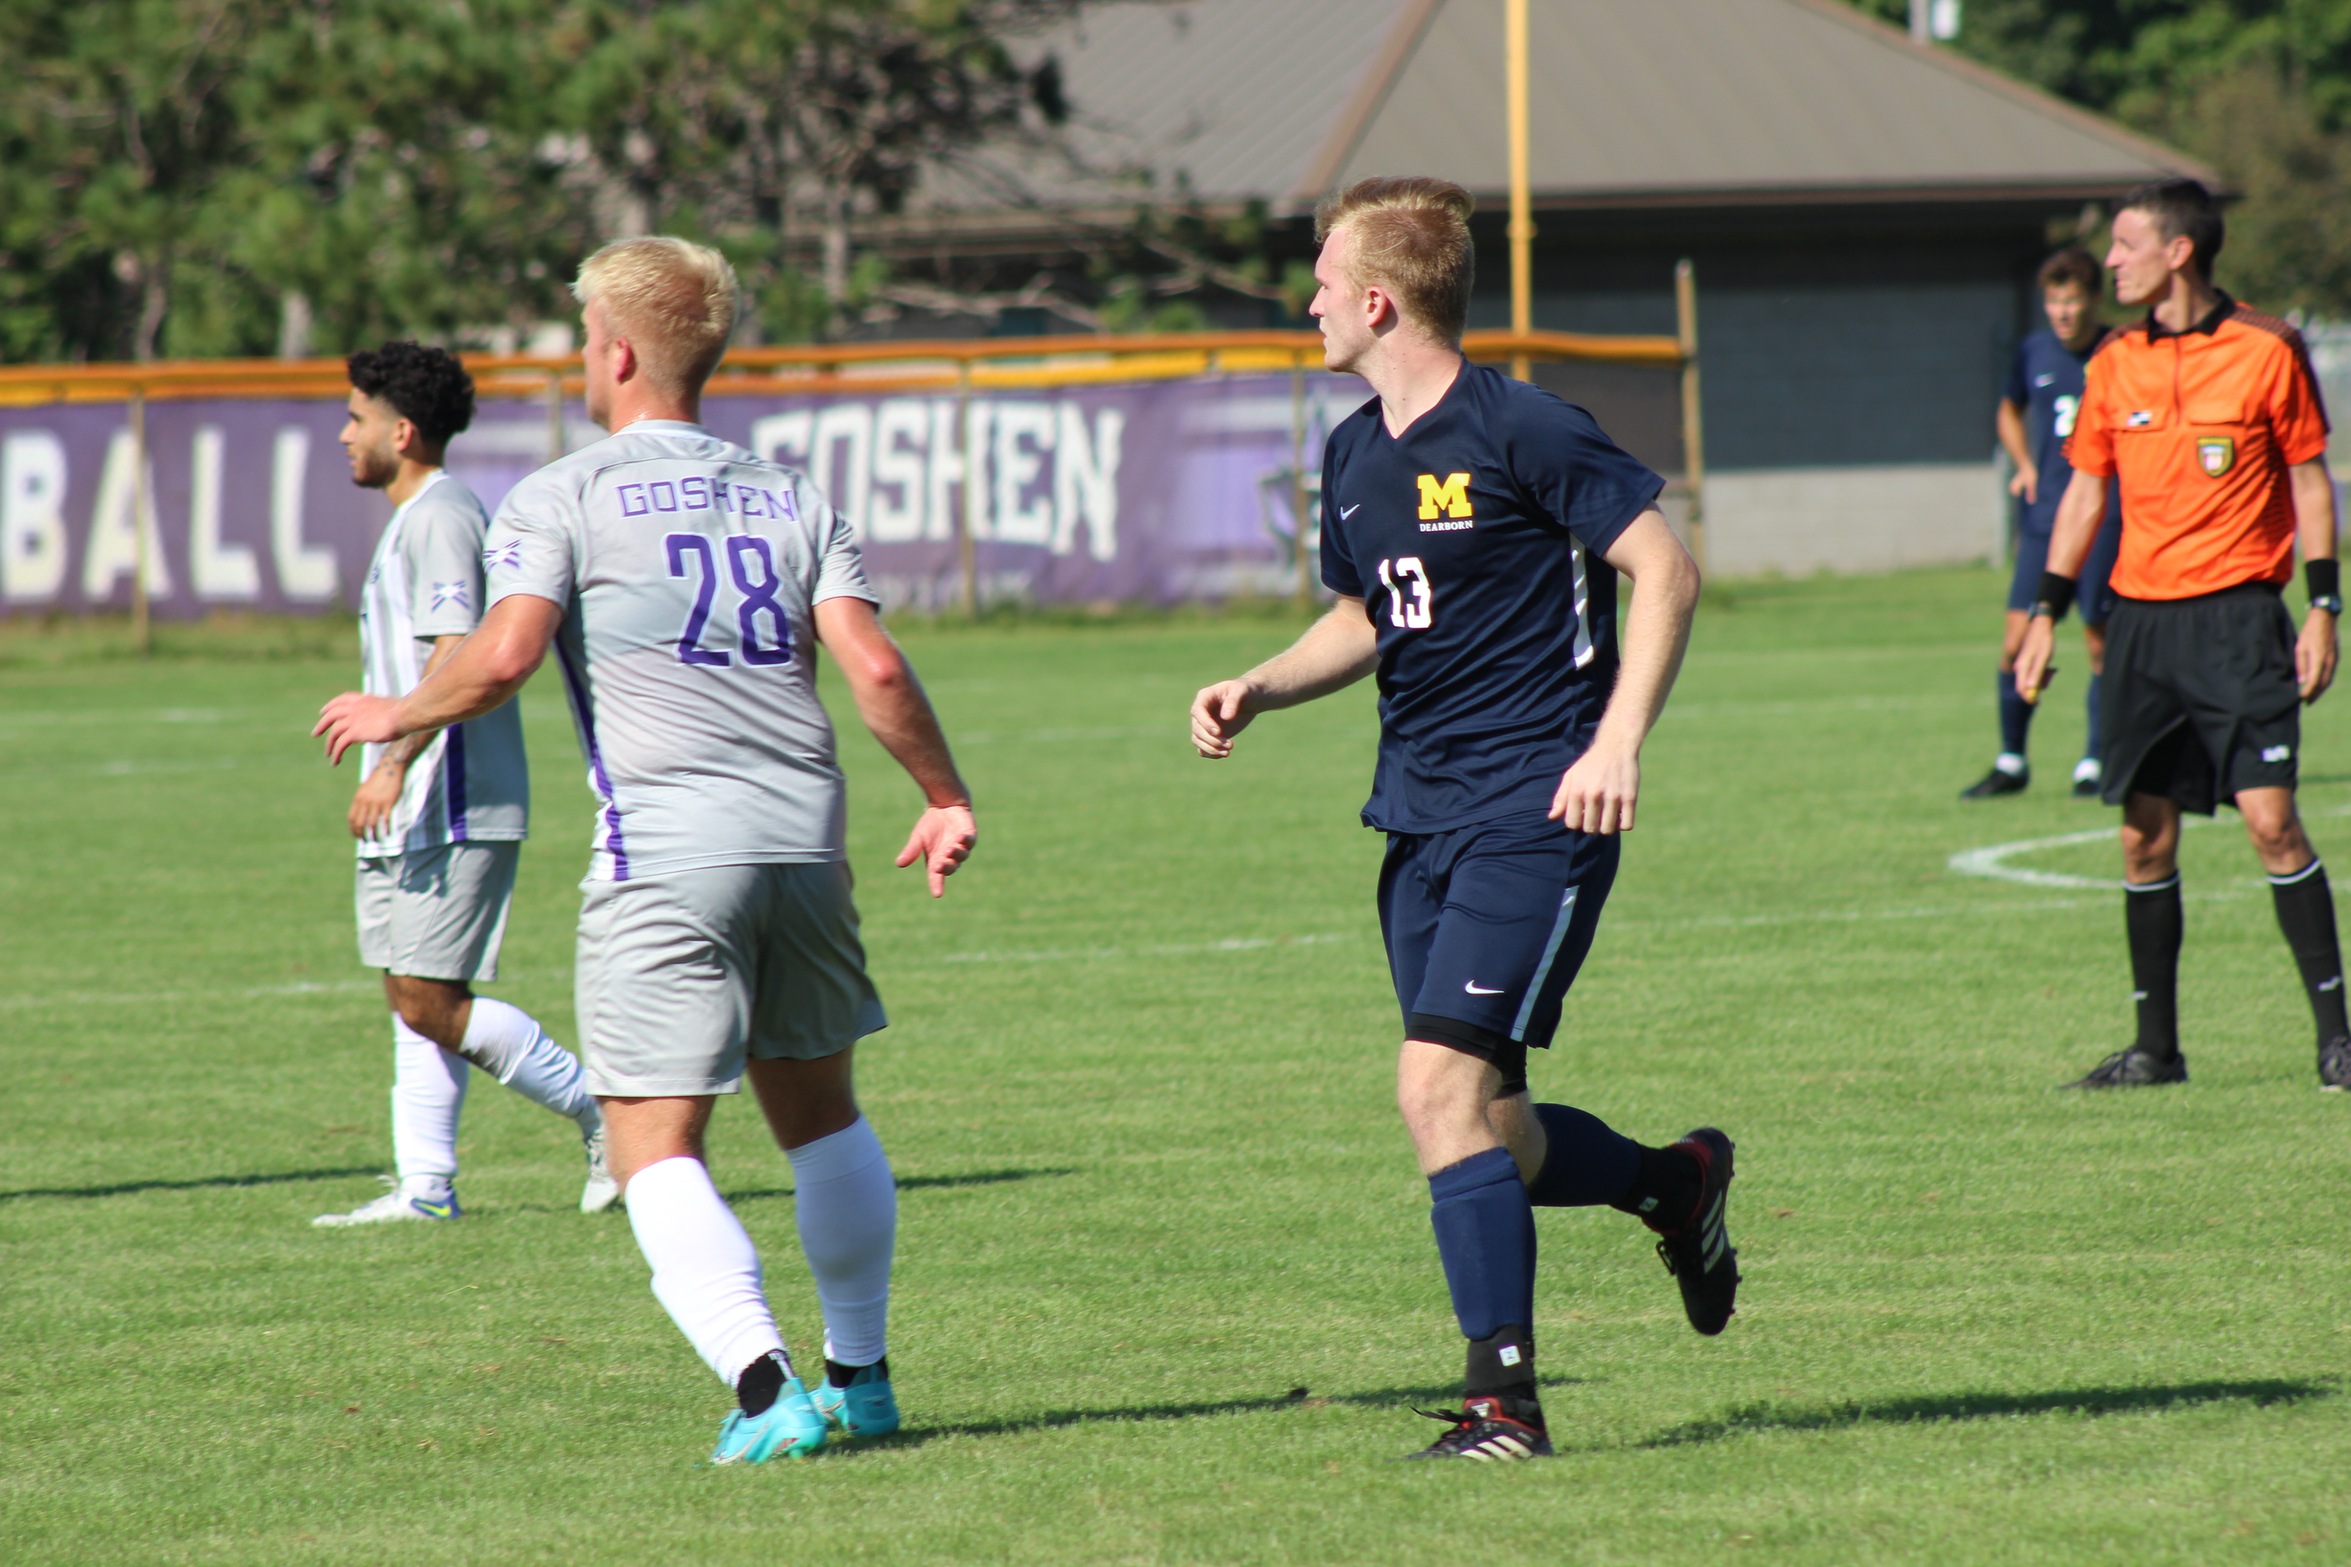 Cole Continues Strong Season in 1-0 Victory over Saint Francis (Ind.)